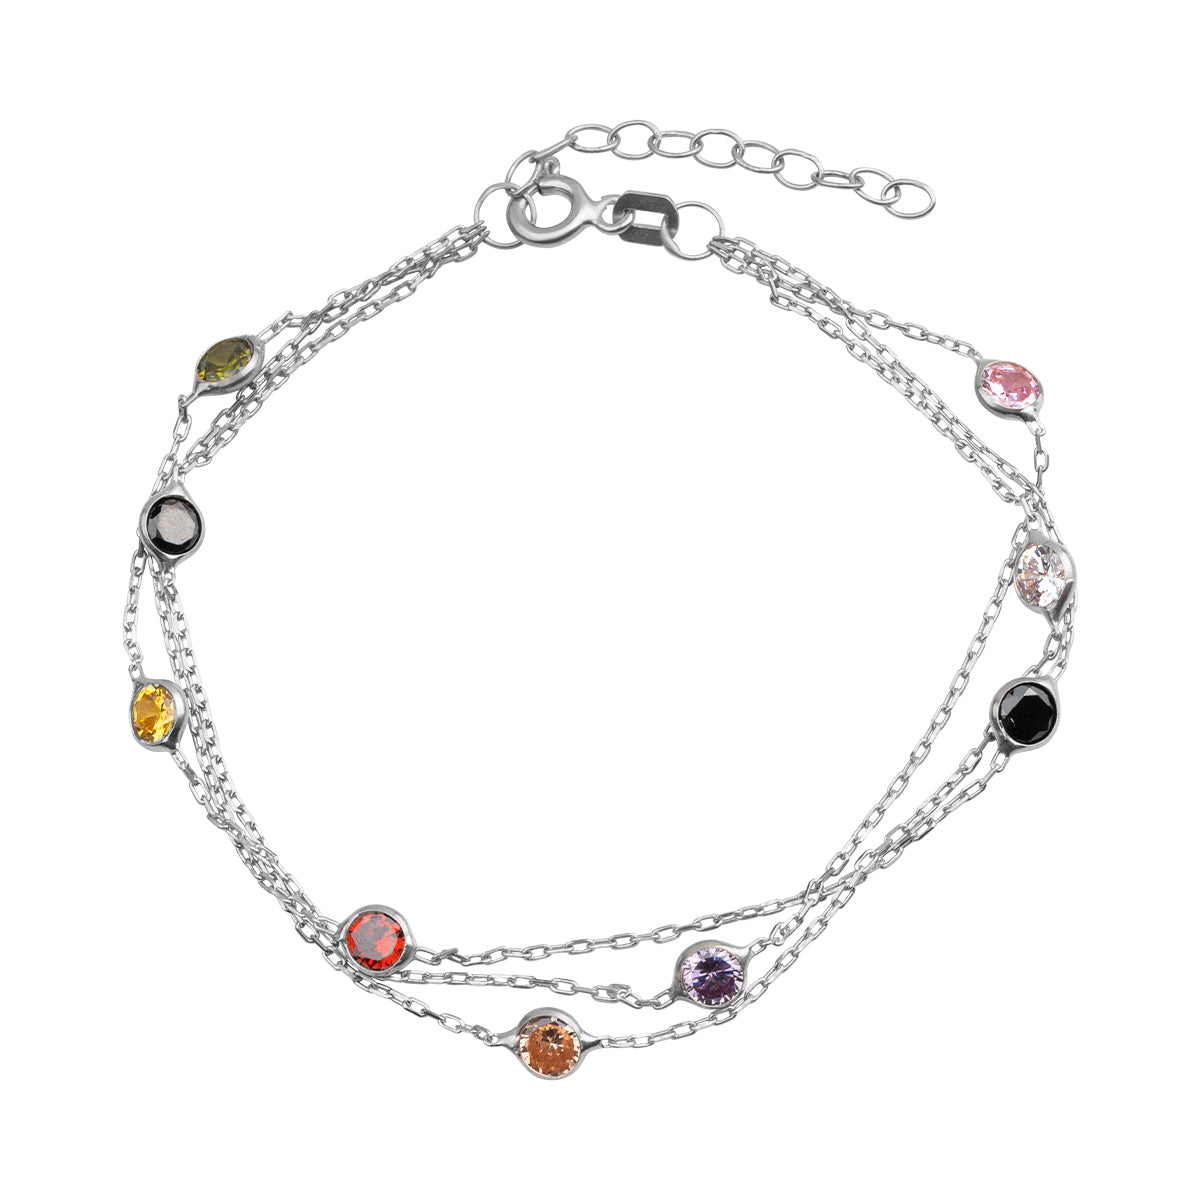 925 Sterling silver rhodium plated, layered chain bracelet with colorful beads.